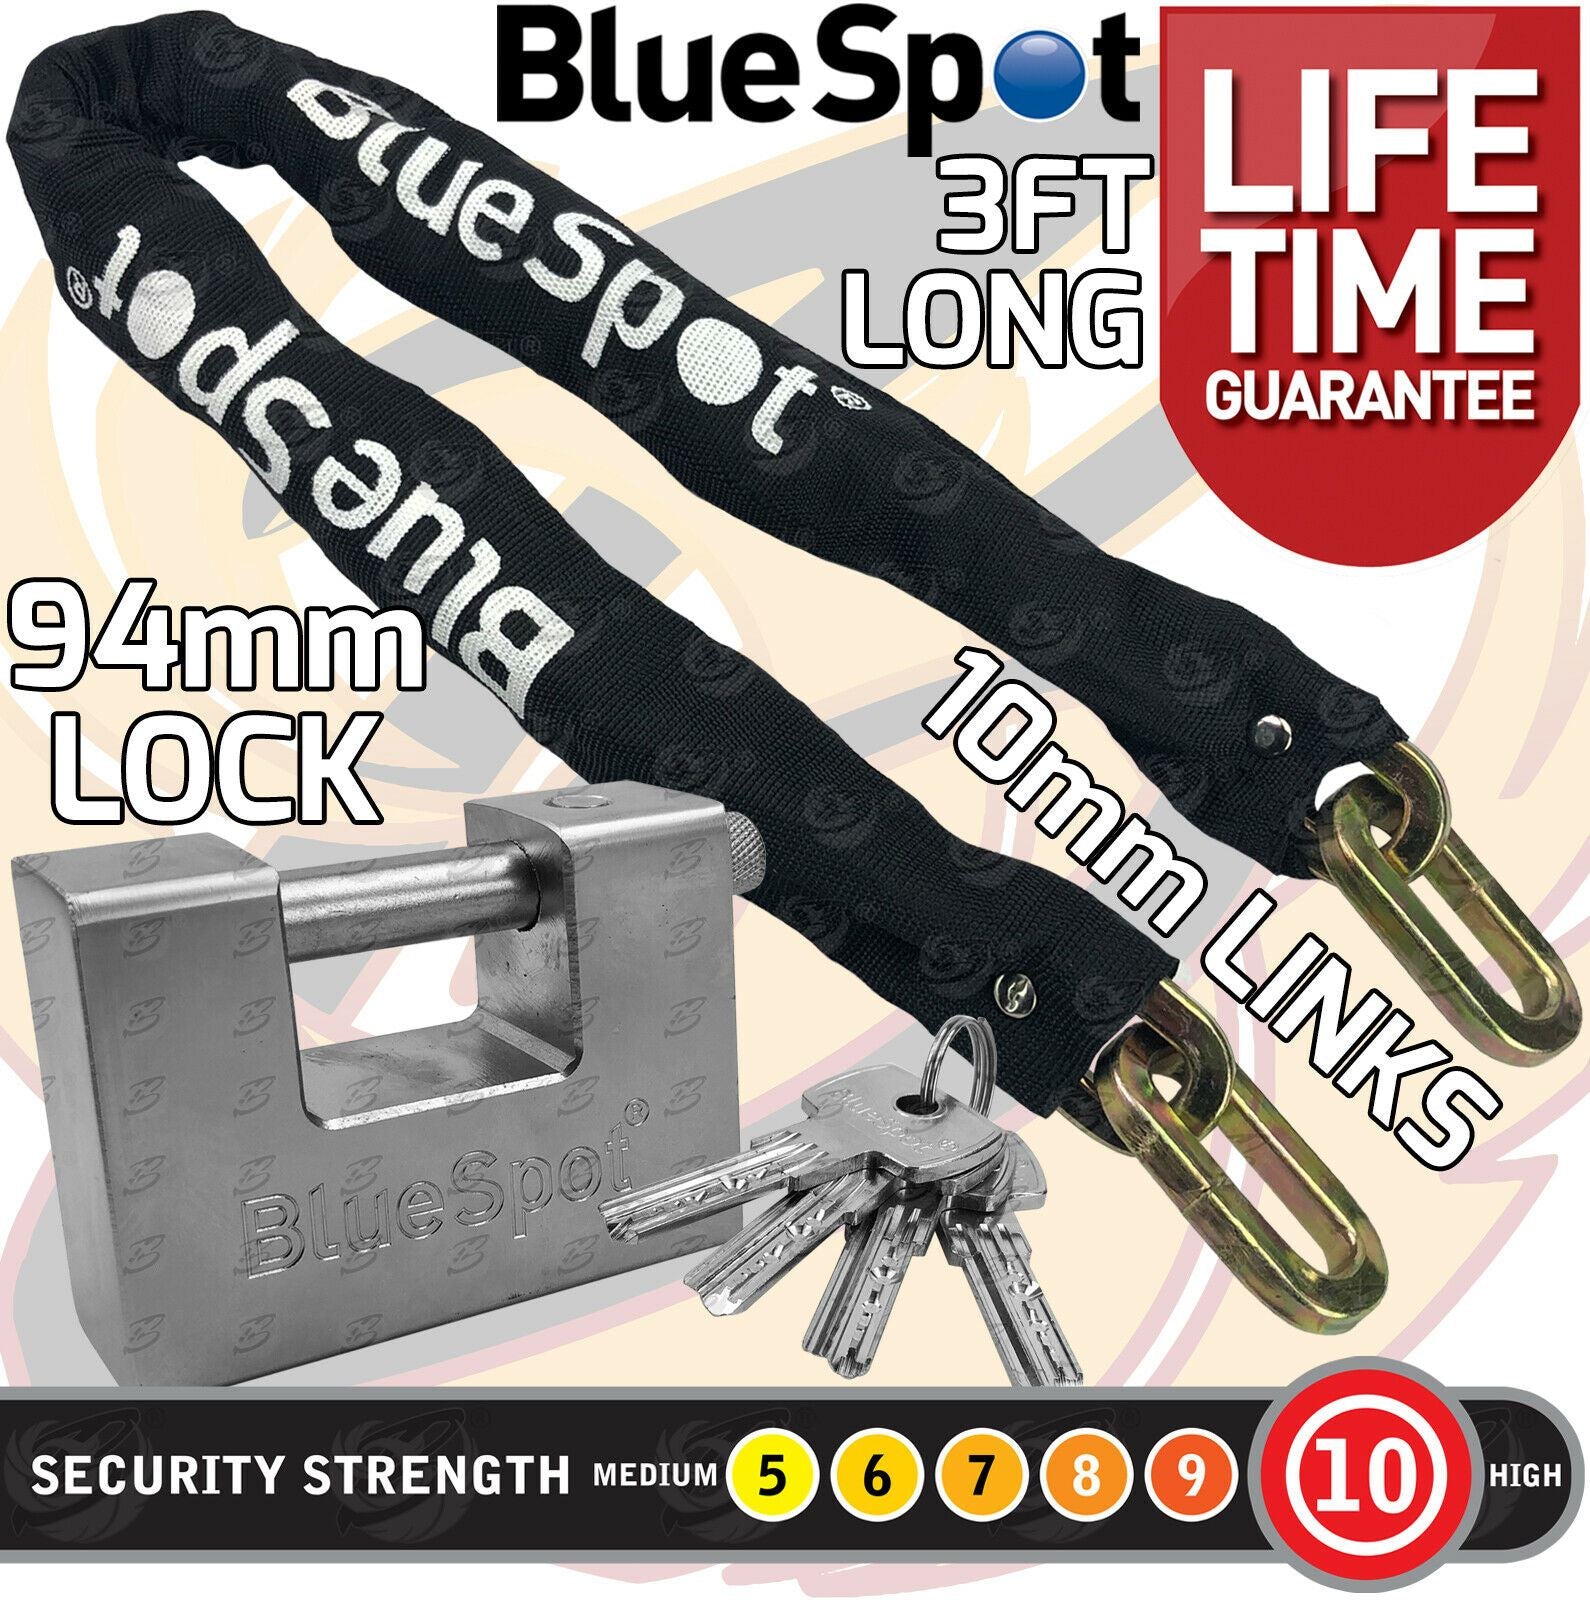 BLUESPOT 3FT LONG 10MM LINKS SECURITY CHAIN WITH 94MM HIGH SECURITY PADLOCK